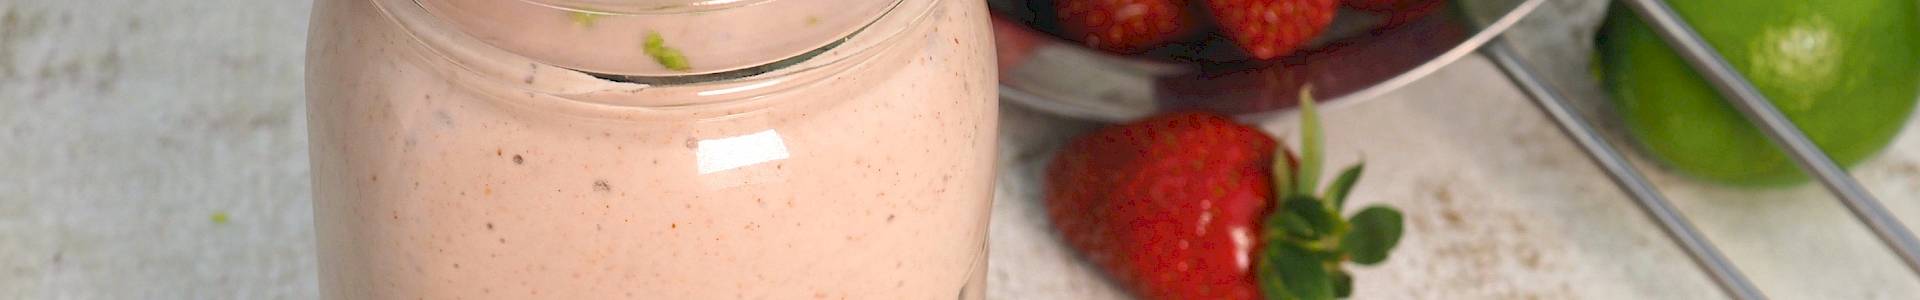 Strawberry & Lime Smoothie